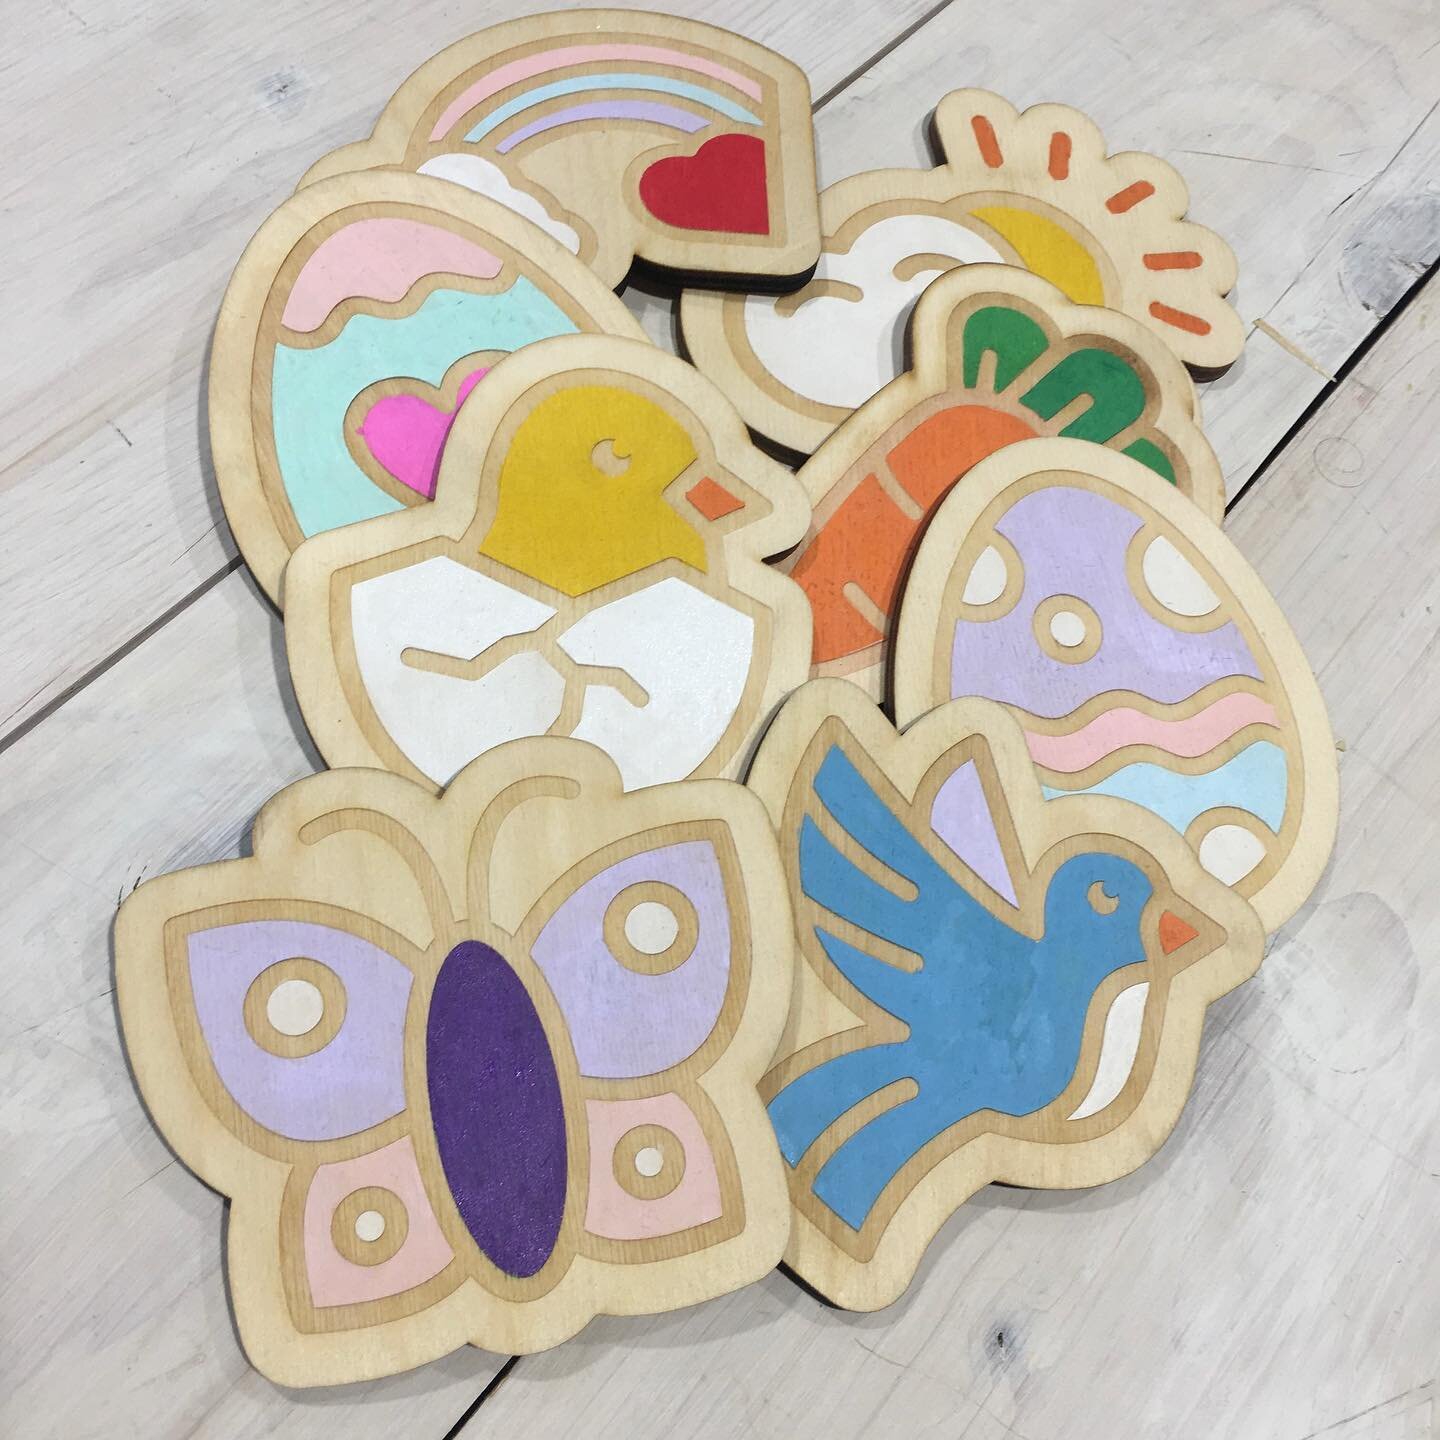 Paint-Your-Own magnets for spring are available now!! The newest release in our Dalahast DIY series features 3 unique sets of 5 paintable laser cut shapes with included magnet strips. Choose from Easter, Spring or Religious for $12 per bag or snag al